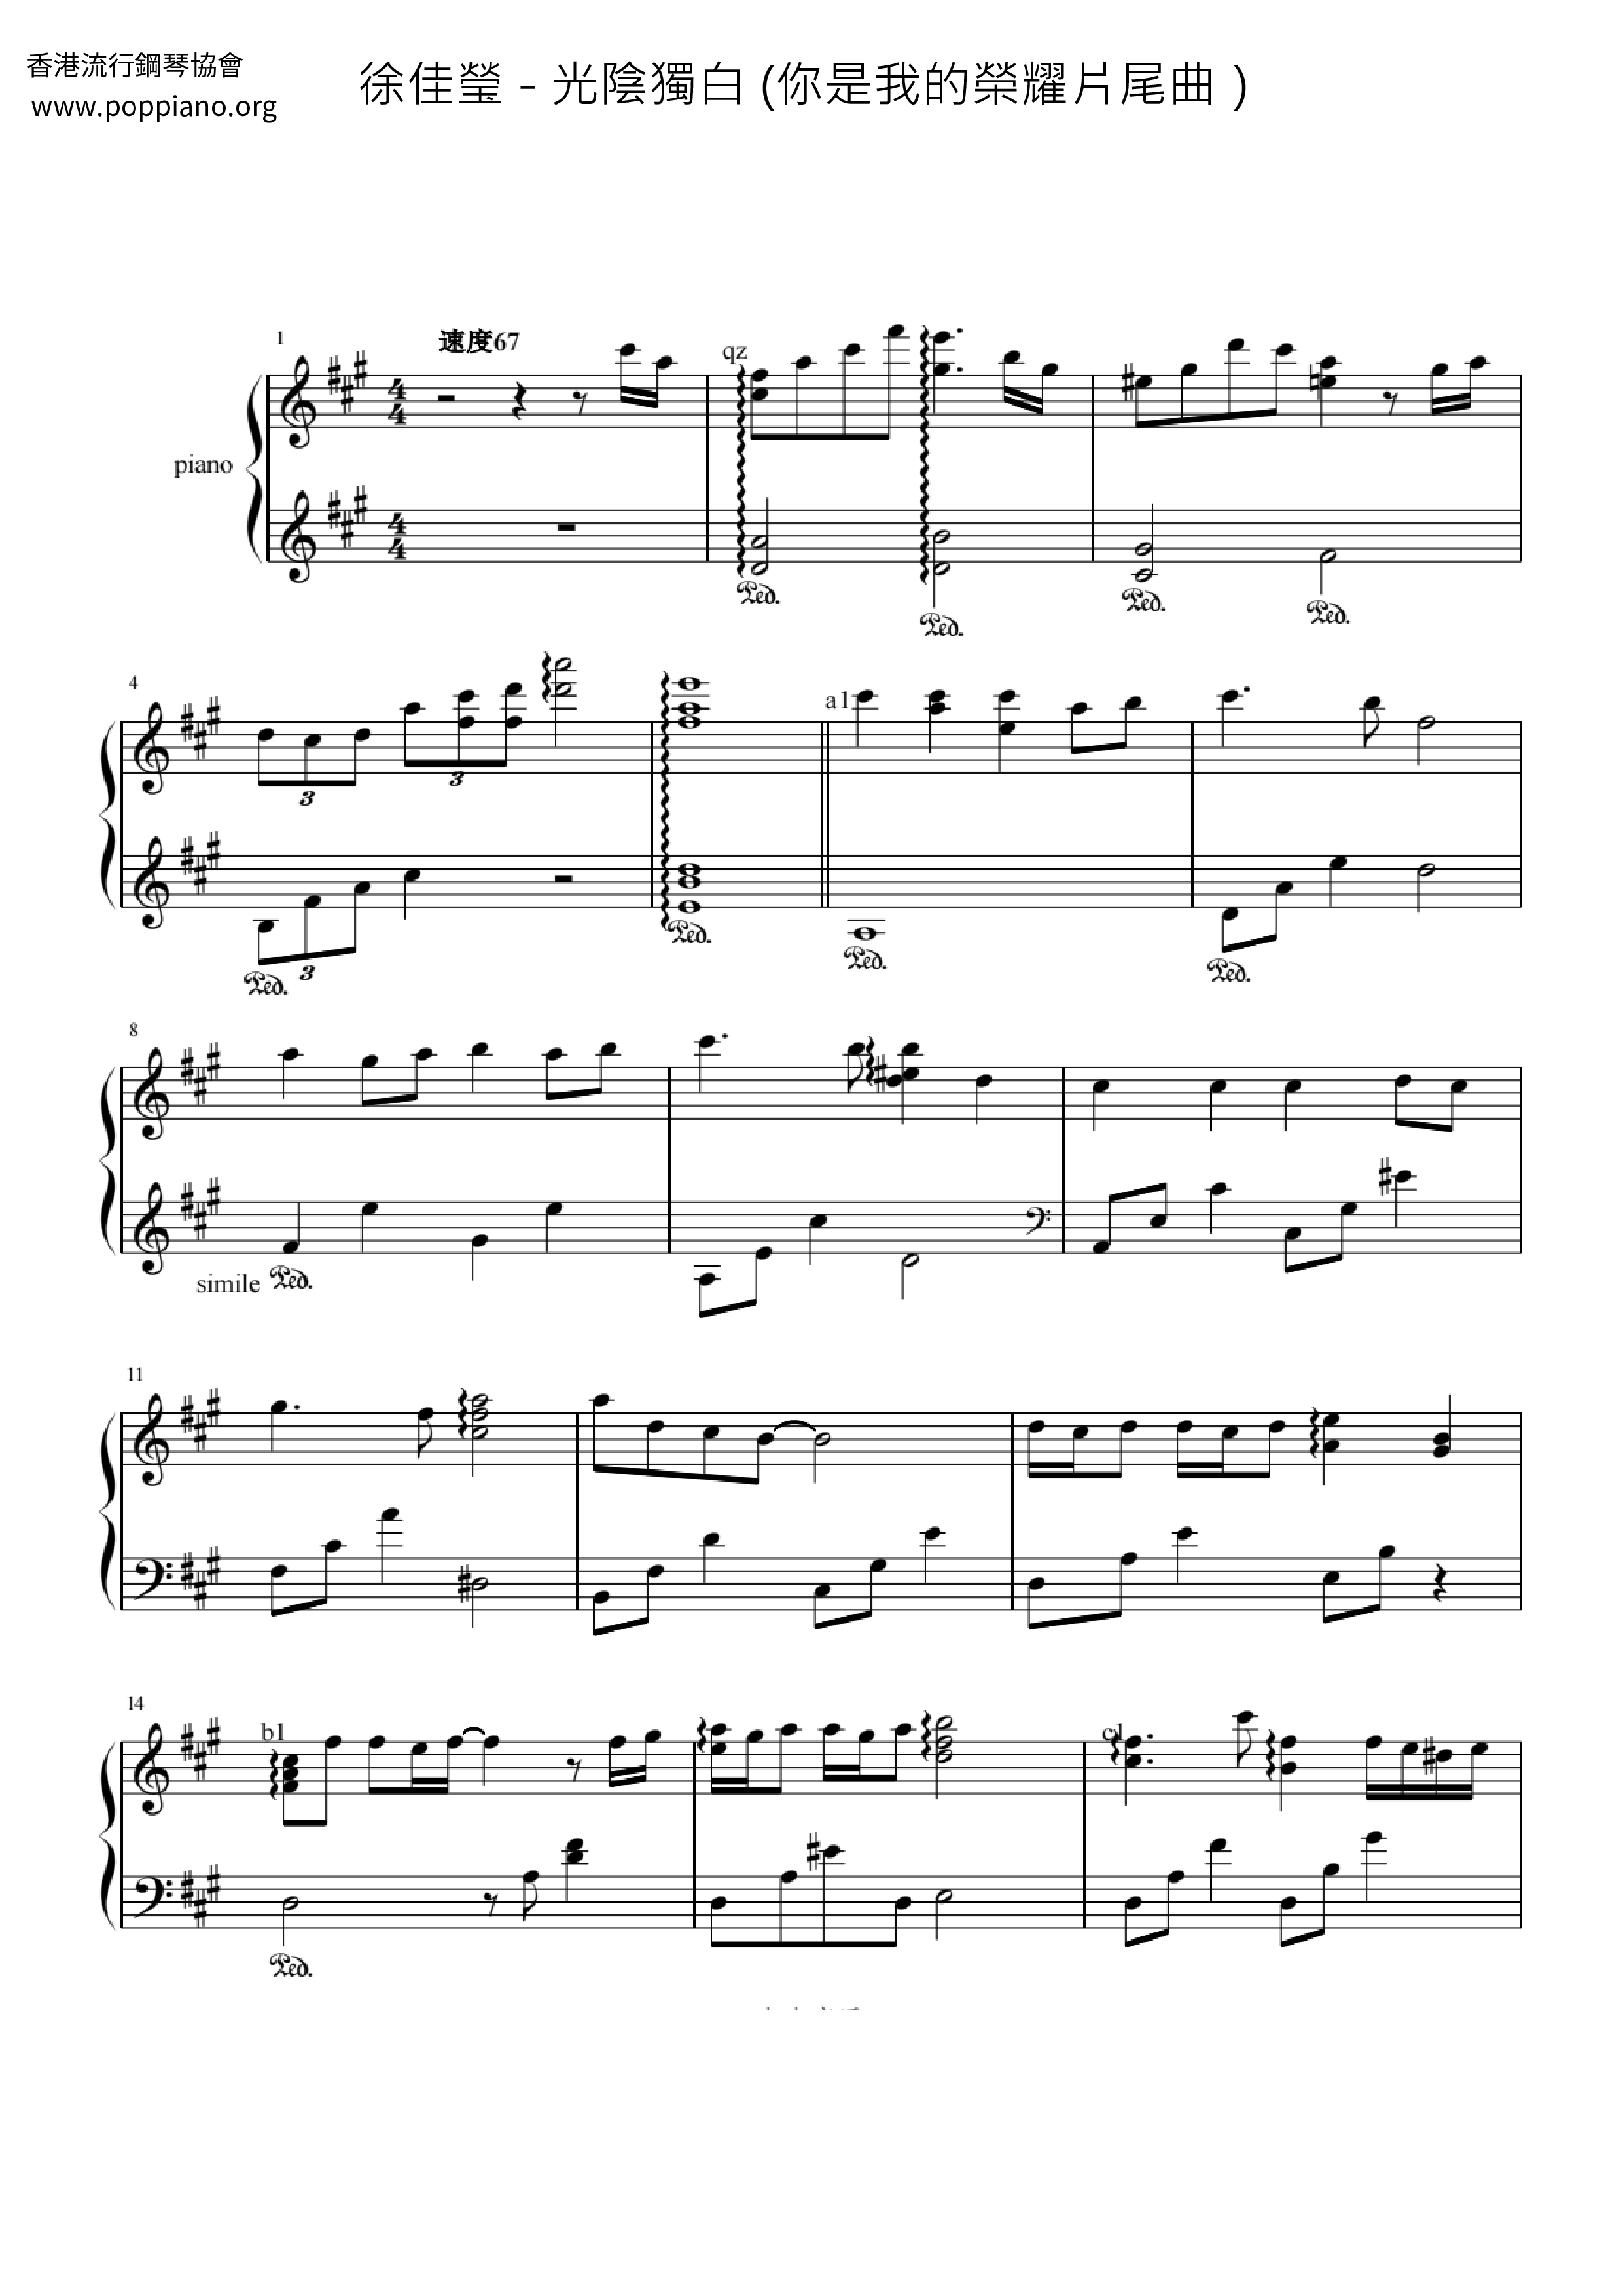 Time Monologue (You Are My Glory Ending Song) Score